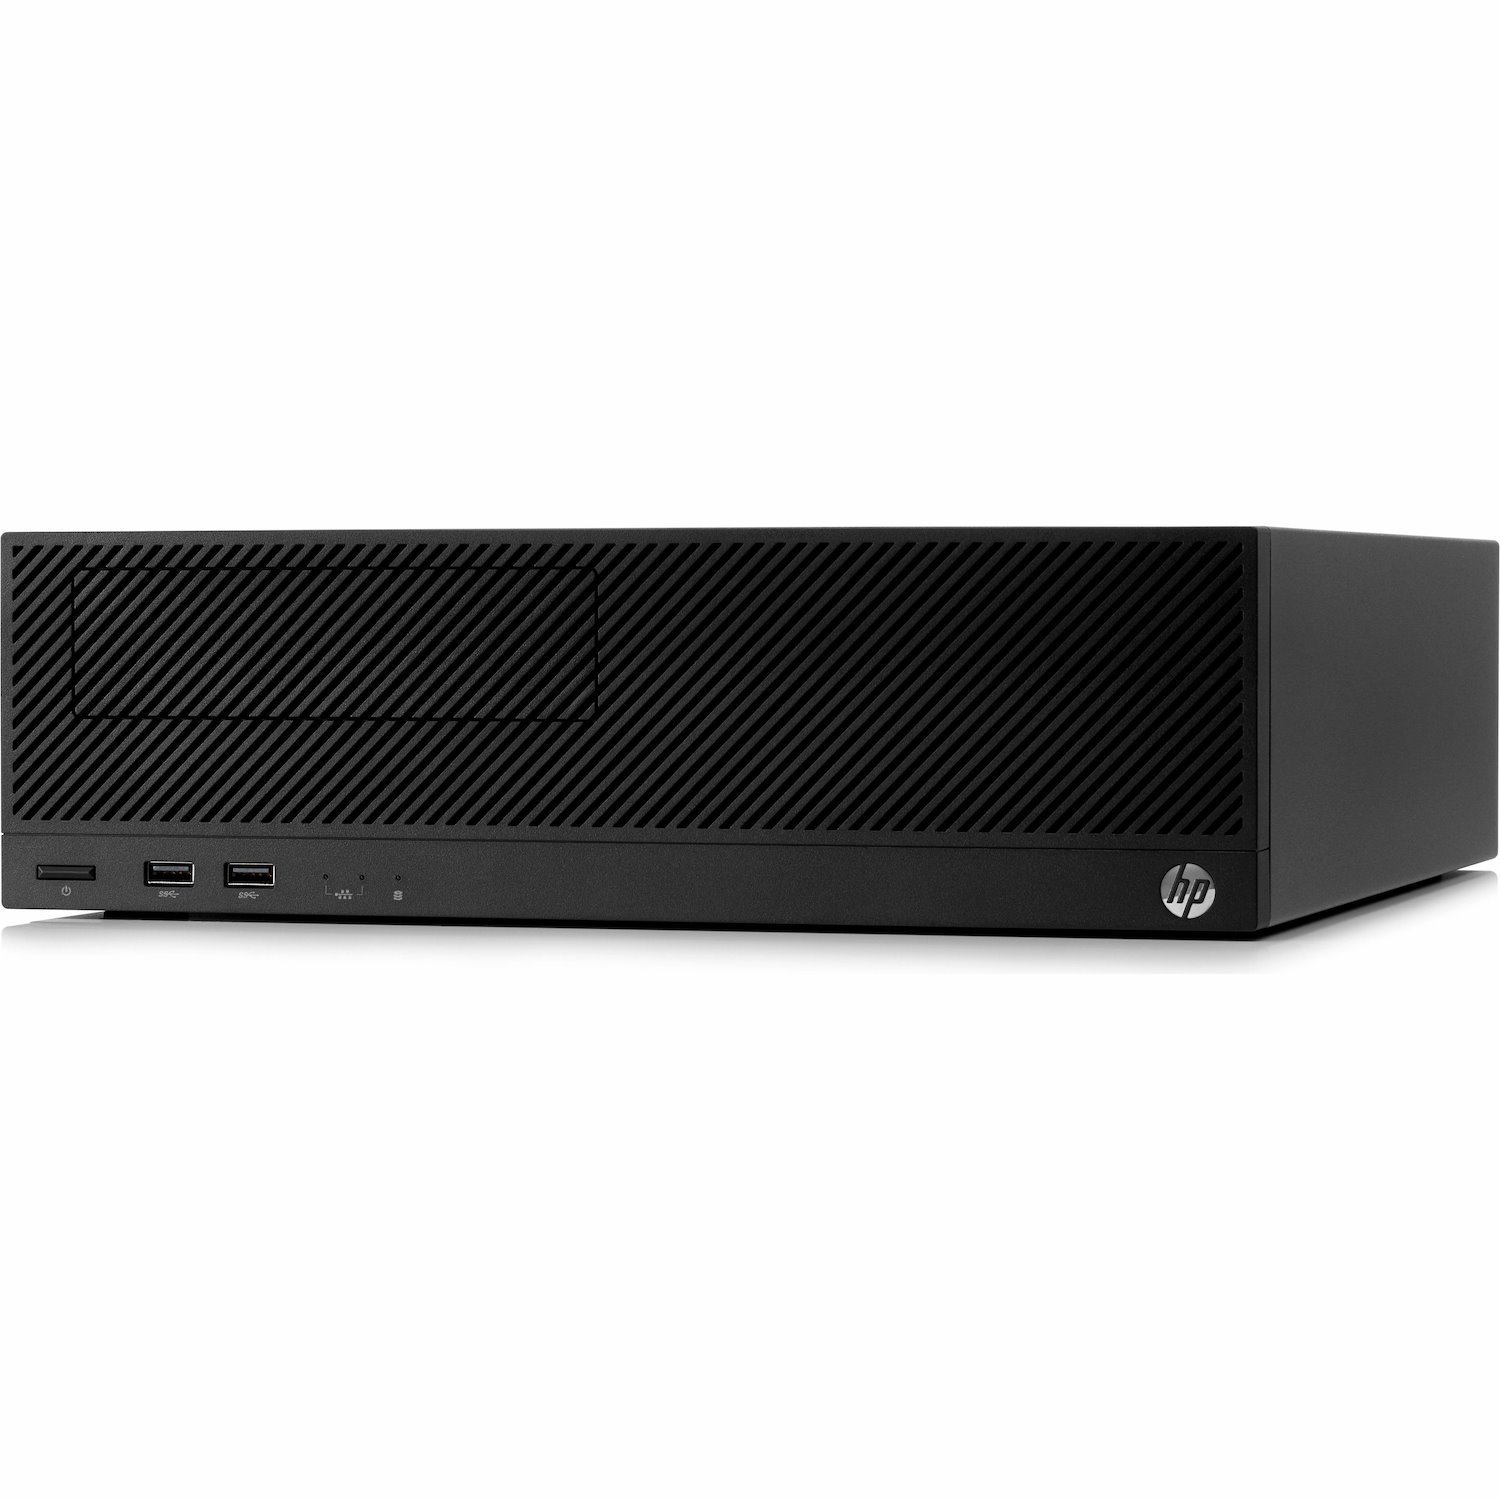 HP Engage Flex Pro Retail System Small Form Factor